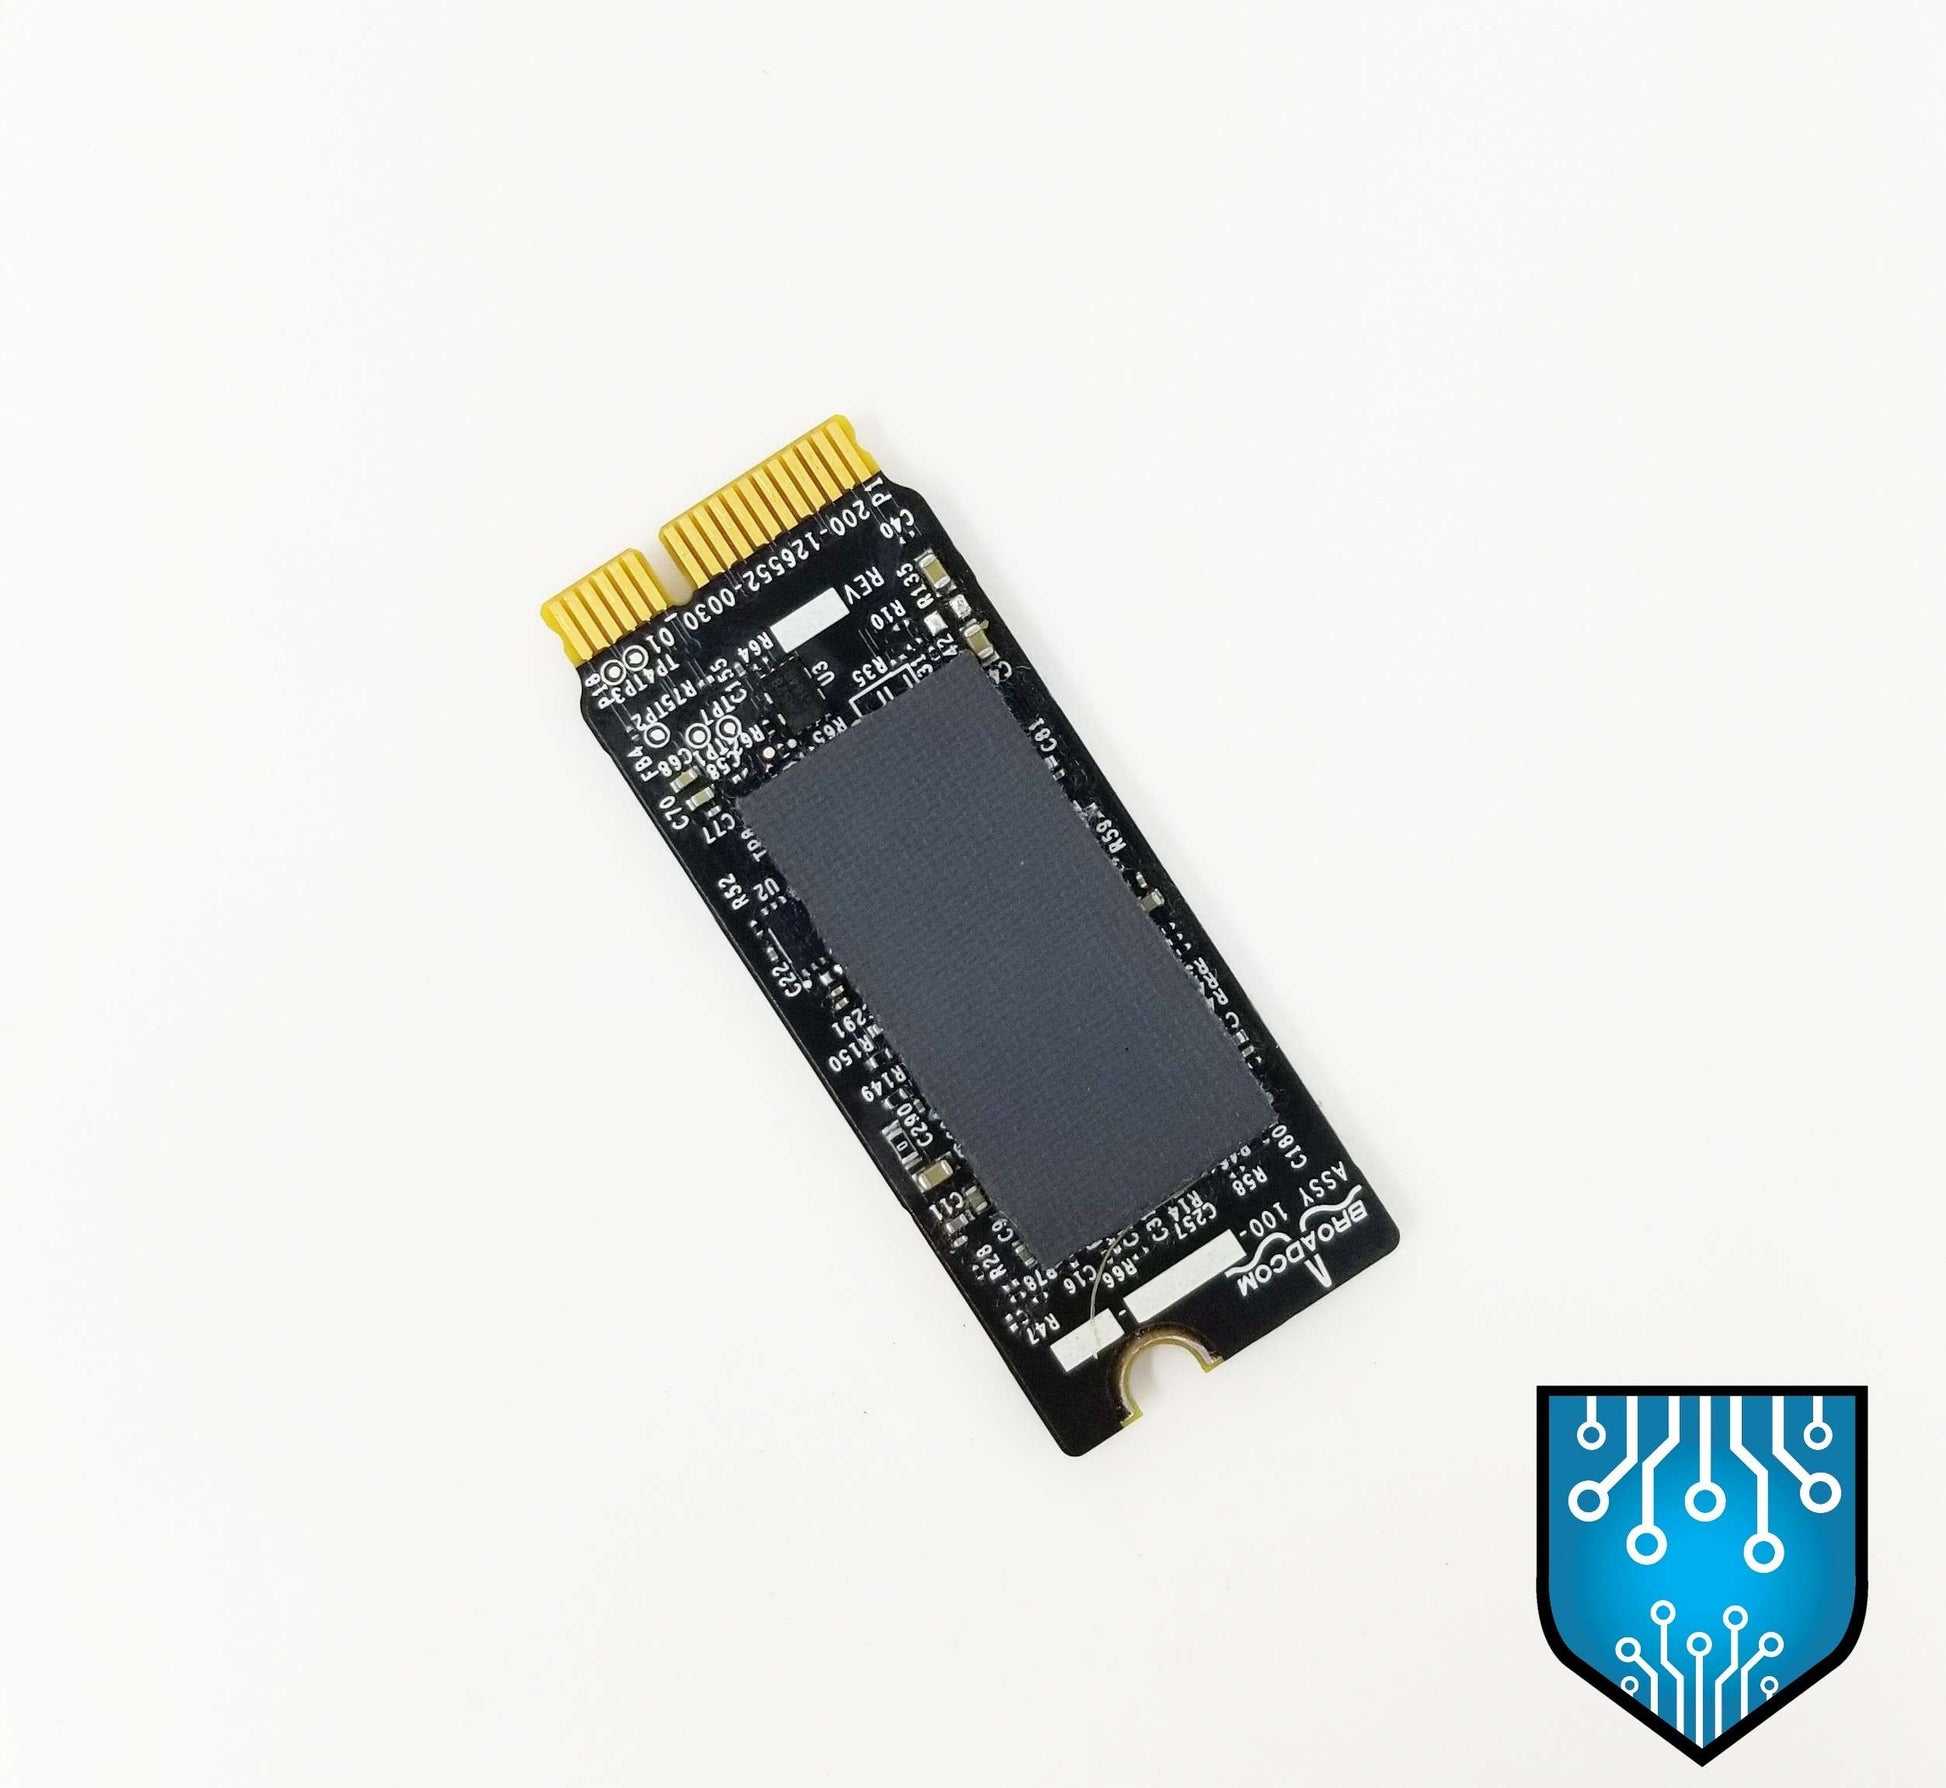 Apple AirPort Wireless Card For MacBook Pro (Late 2013 - Mid 2014)